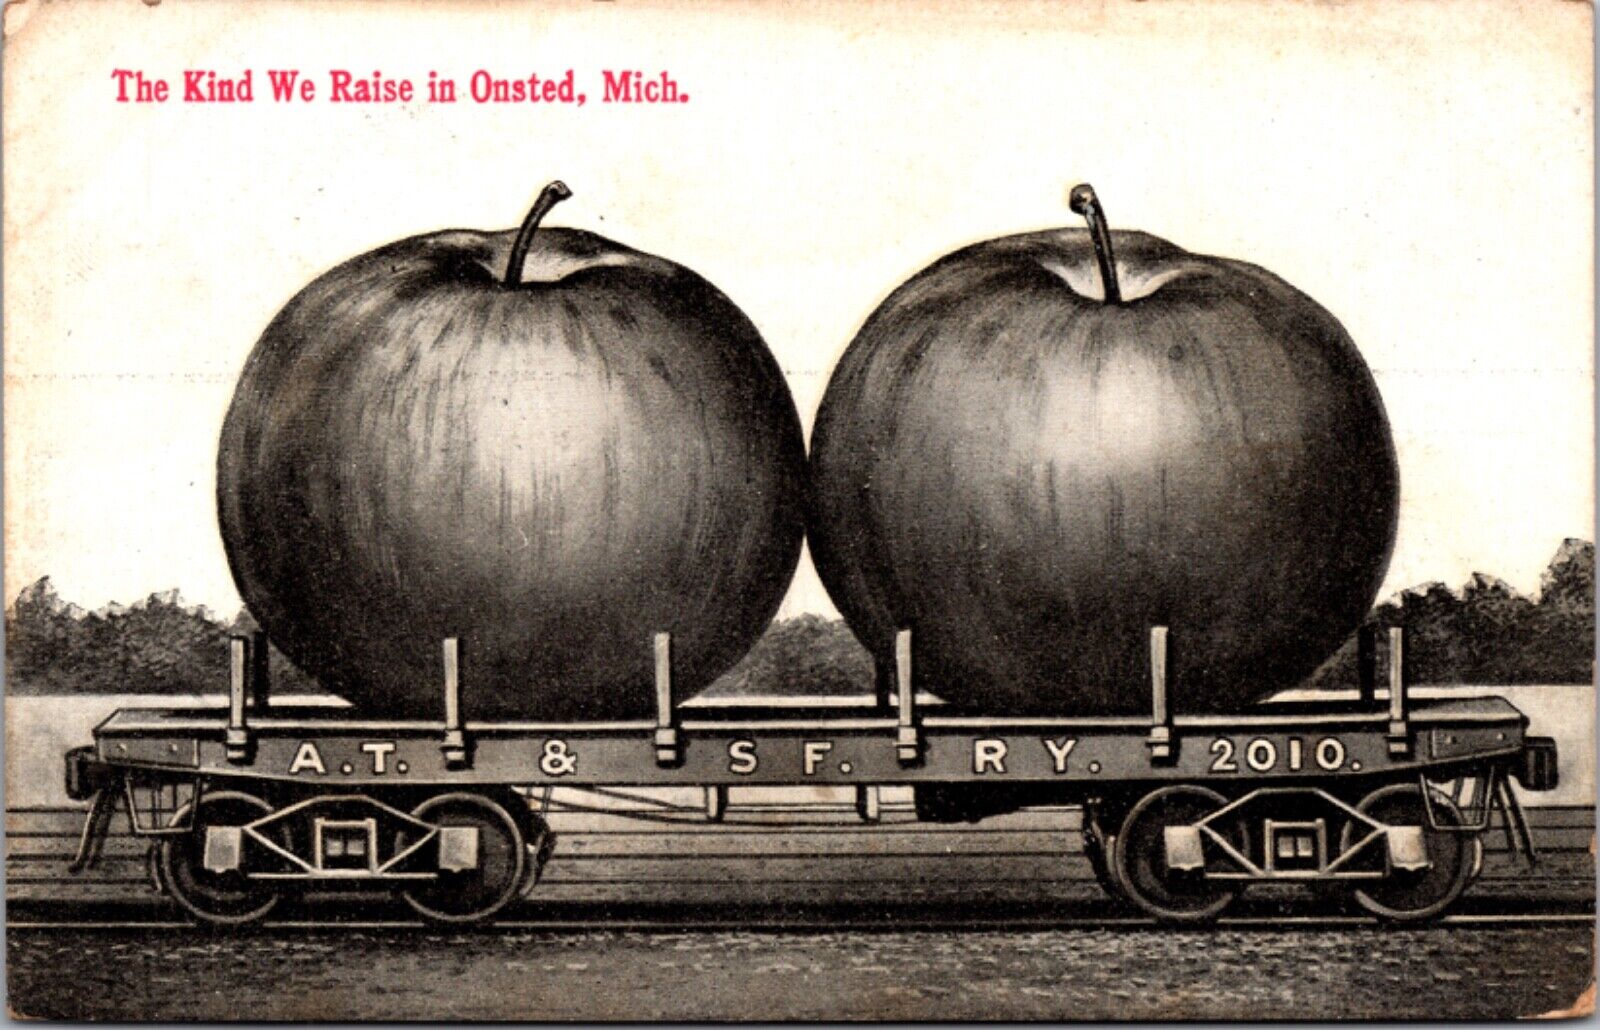 Exaggeration PC Giant Apples on Railroad Train Freight Car Onsted Michigan